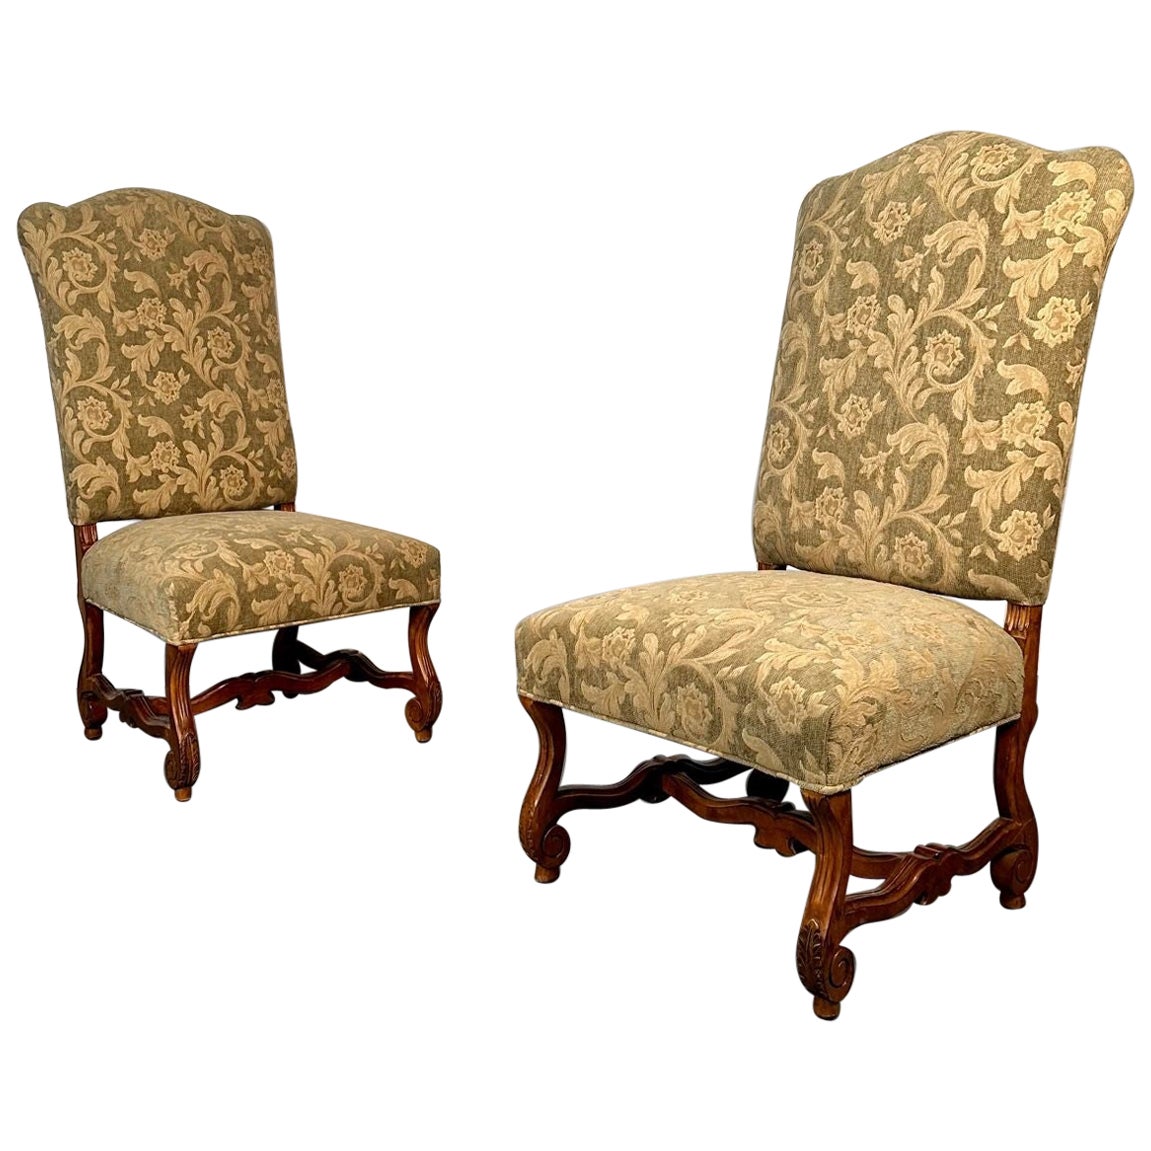 Pair of Jacobean Throne Chairs, King and Queen, Fine Fabric